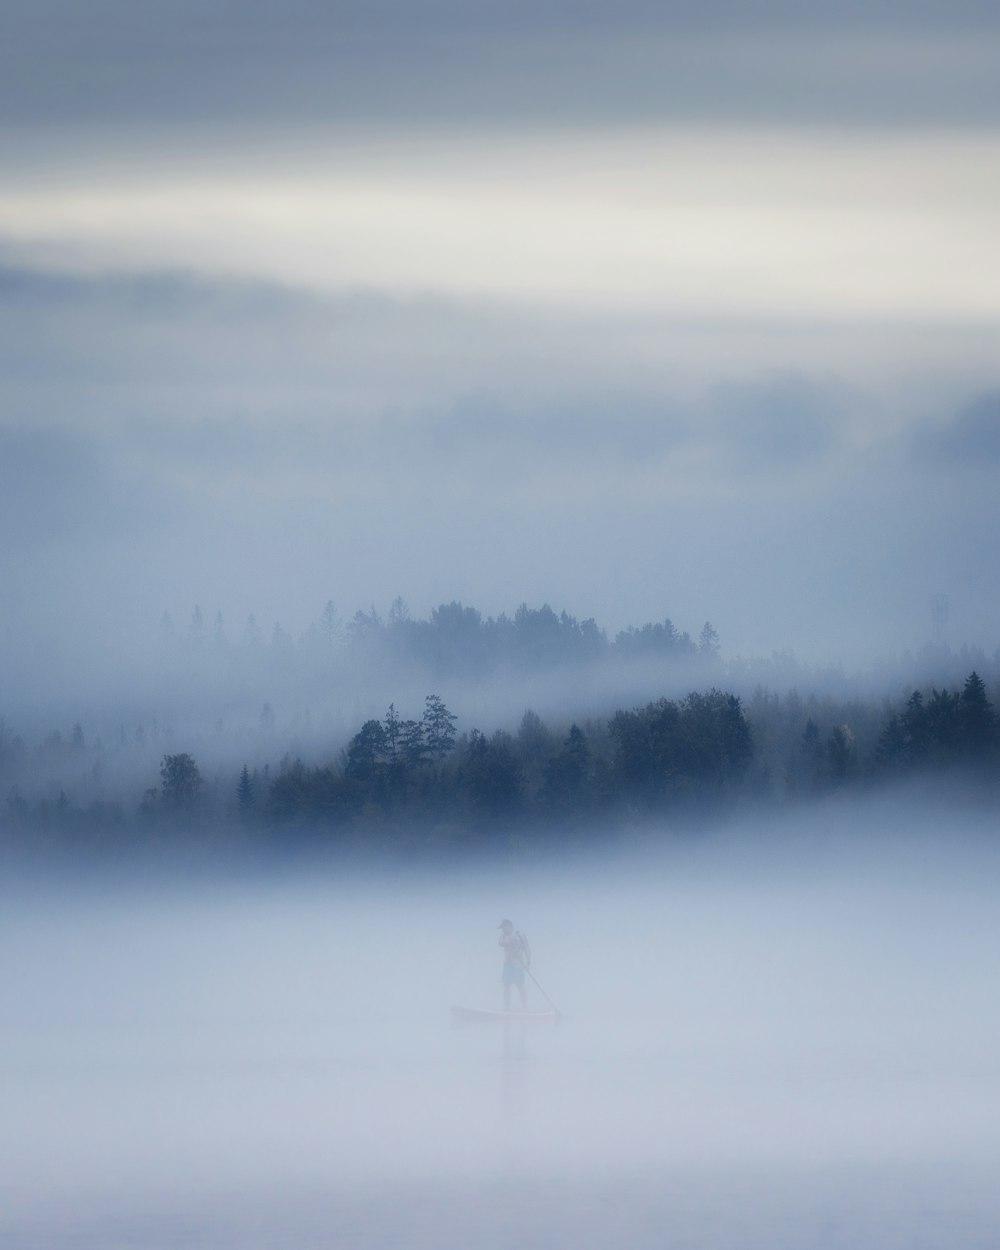 a person standing in the middle of a foggy field